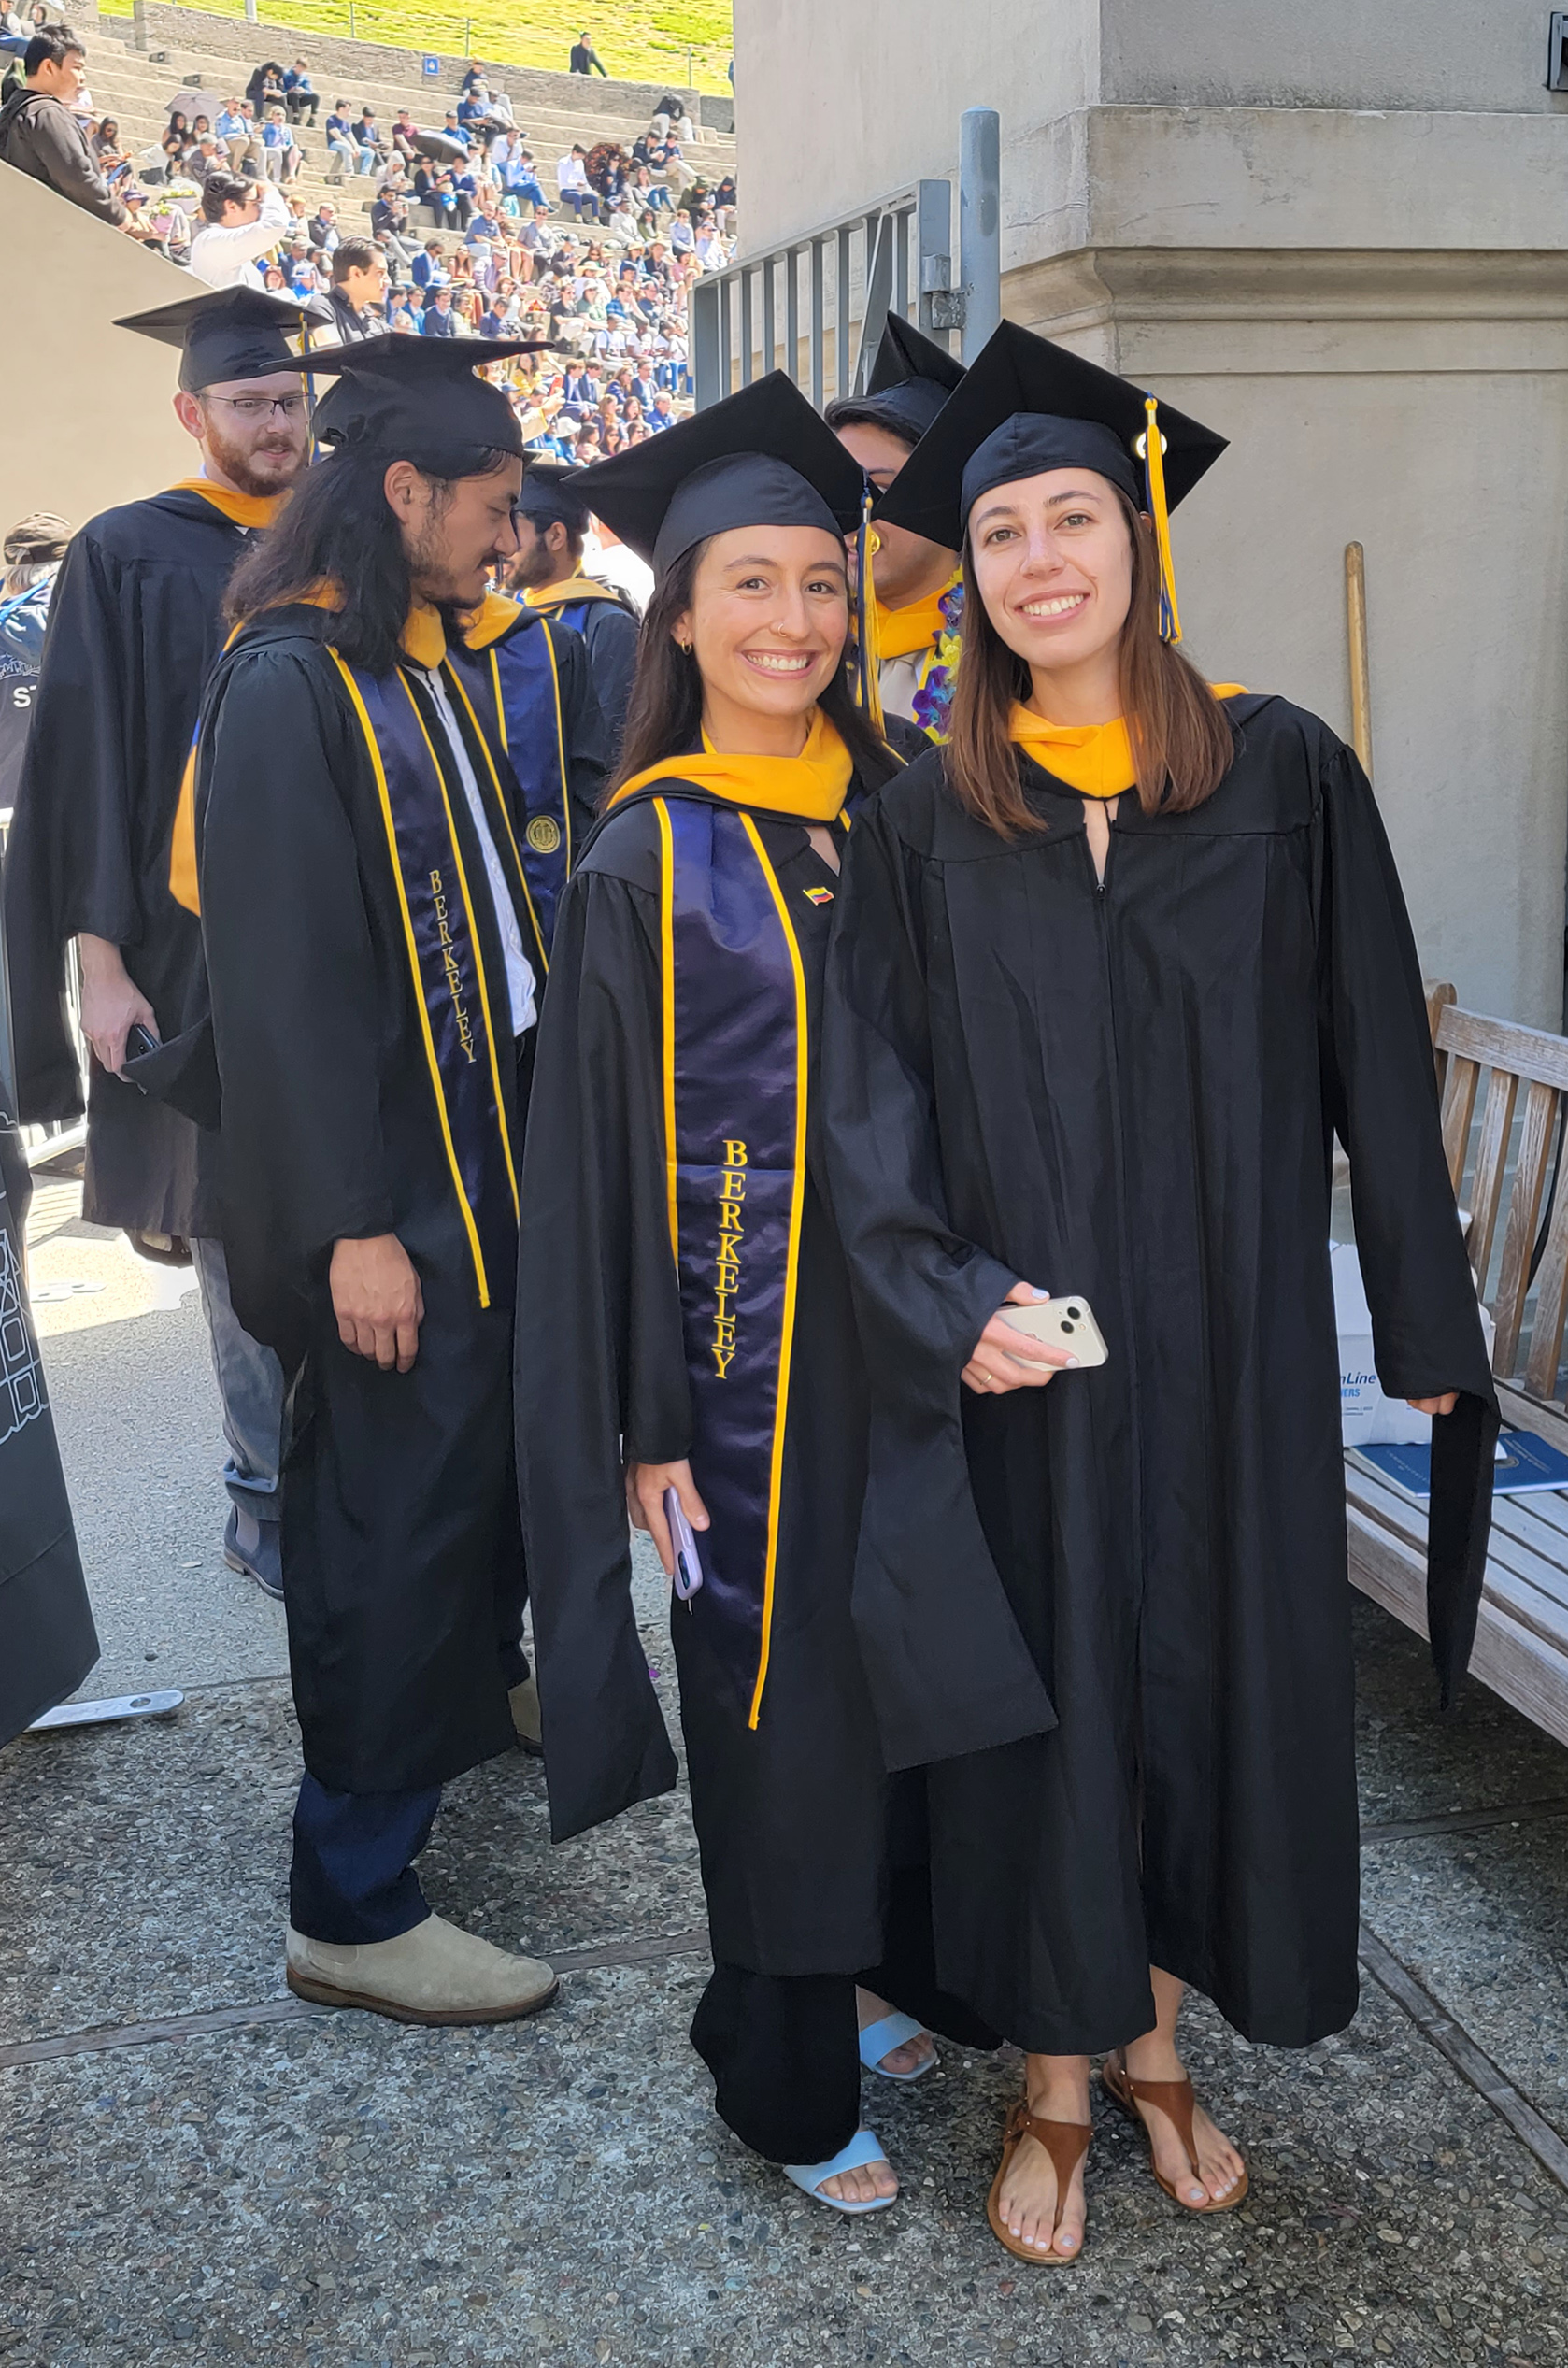 Master students ready to walk across the stage